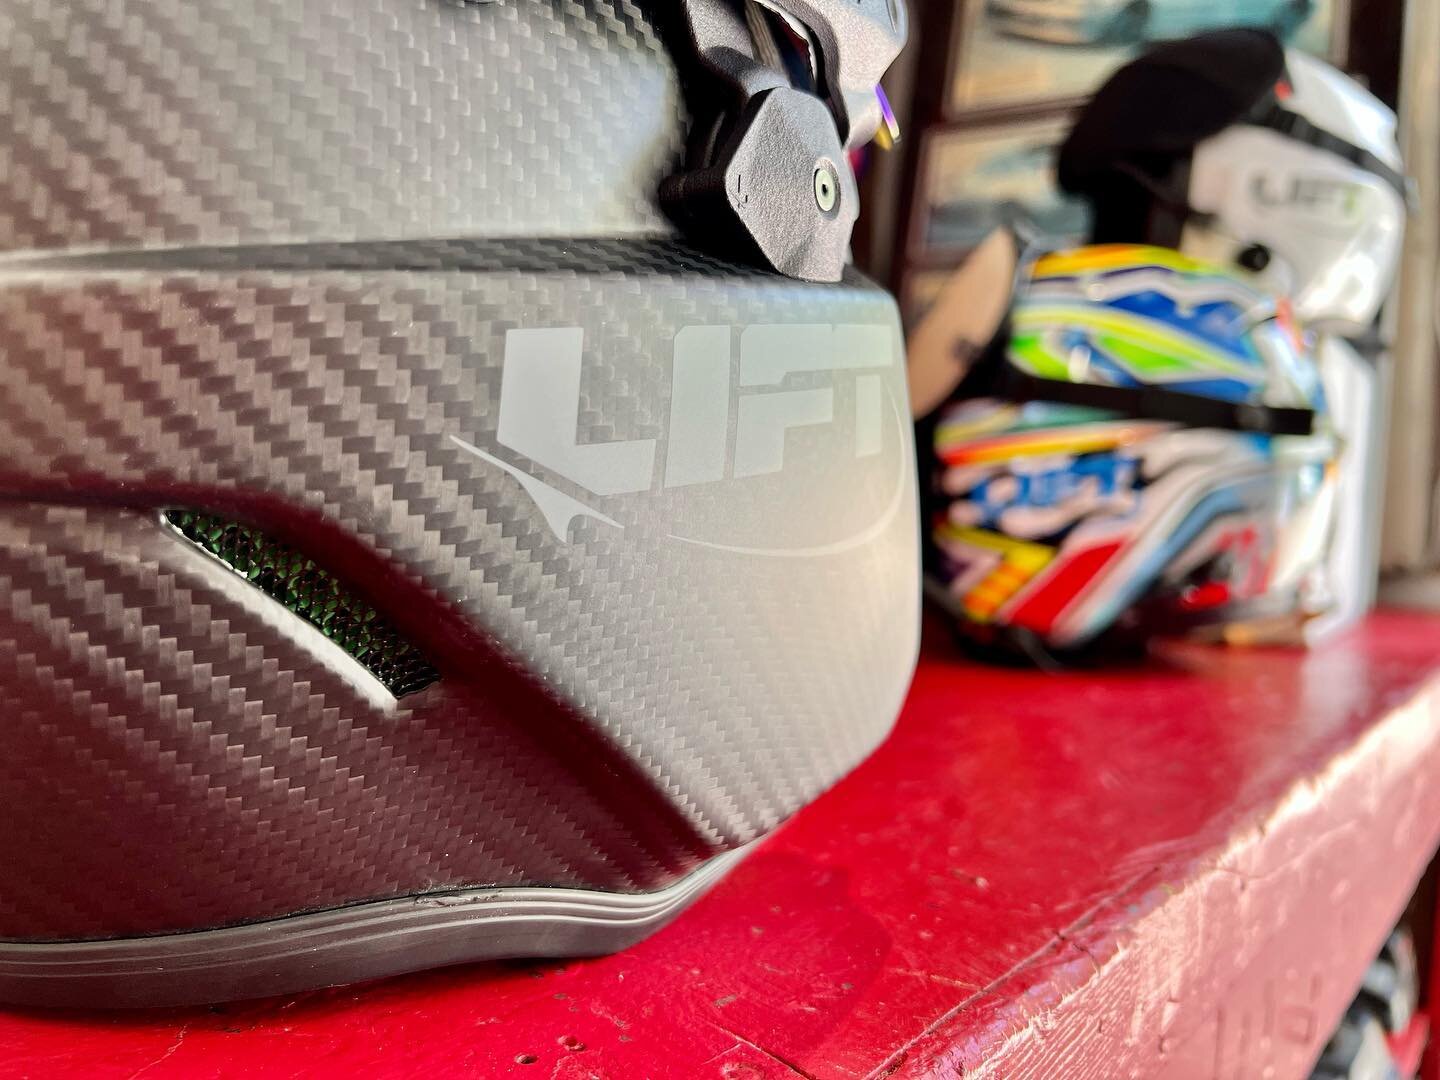 Ohhhhhhh snap! That @liftaviationusa carbon AV-1 just came in with the fixed visor! I got the comms installed this afternoon, gonna try to fly with the new setup tomorrow!  #mpaviation #liftaviation #liftaviationusa #helmet #helmetporn #av1 #aviation